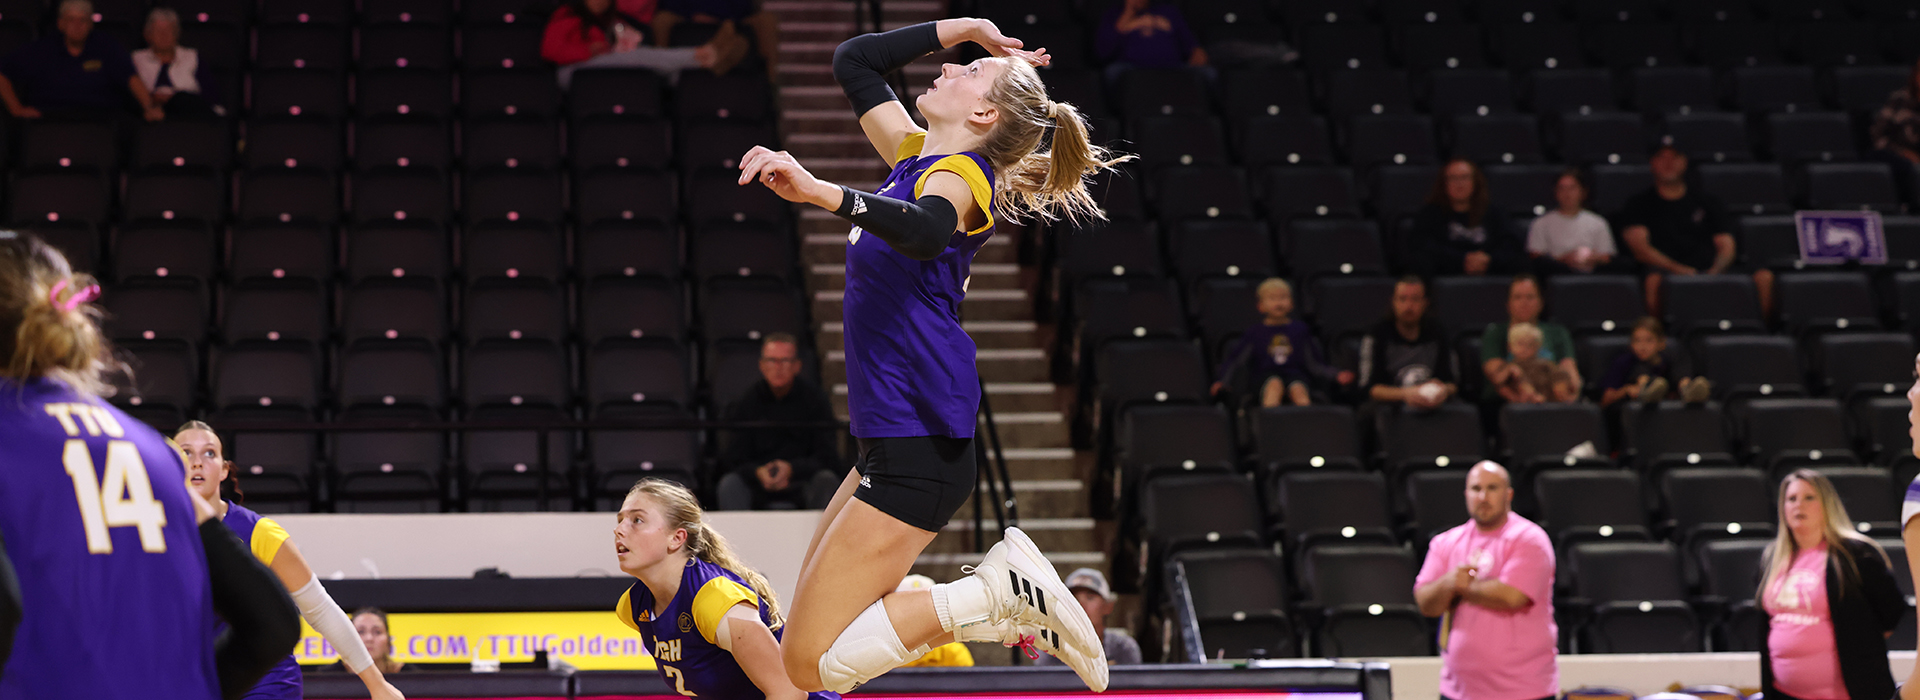 Tech clinches weekend sweep over Western Illinois with 3-1 win